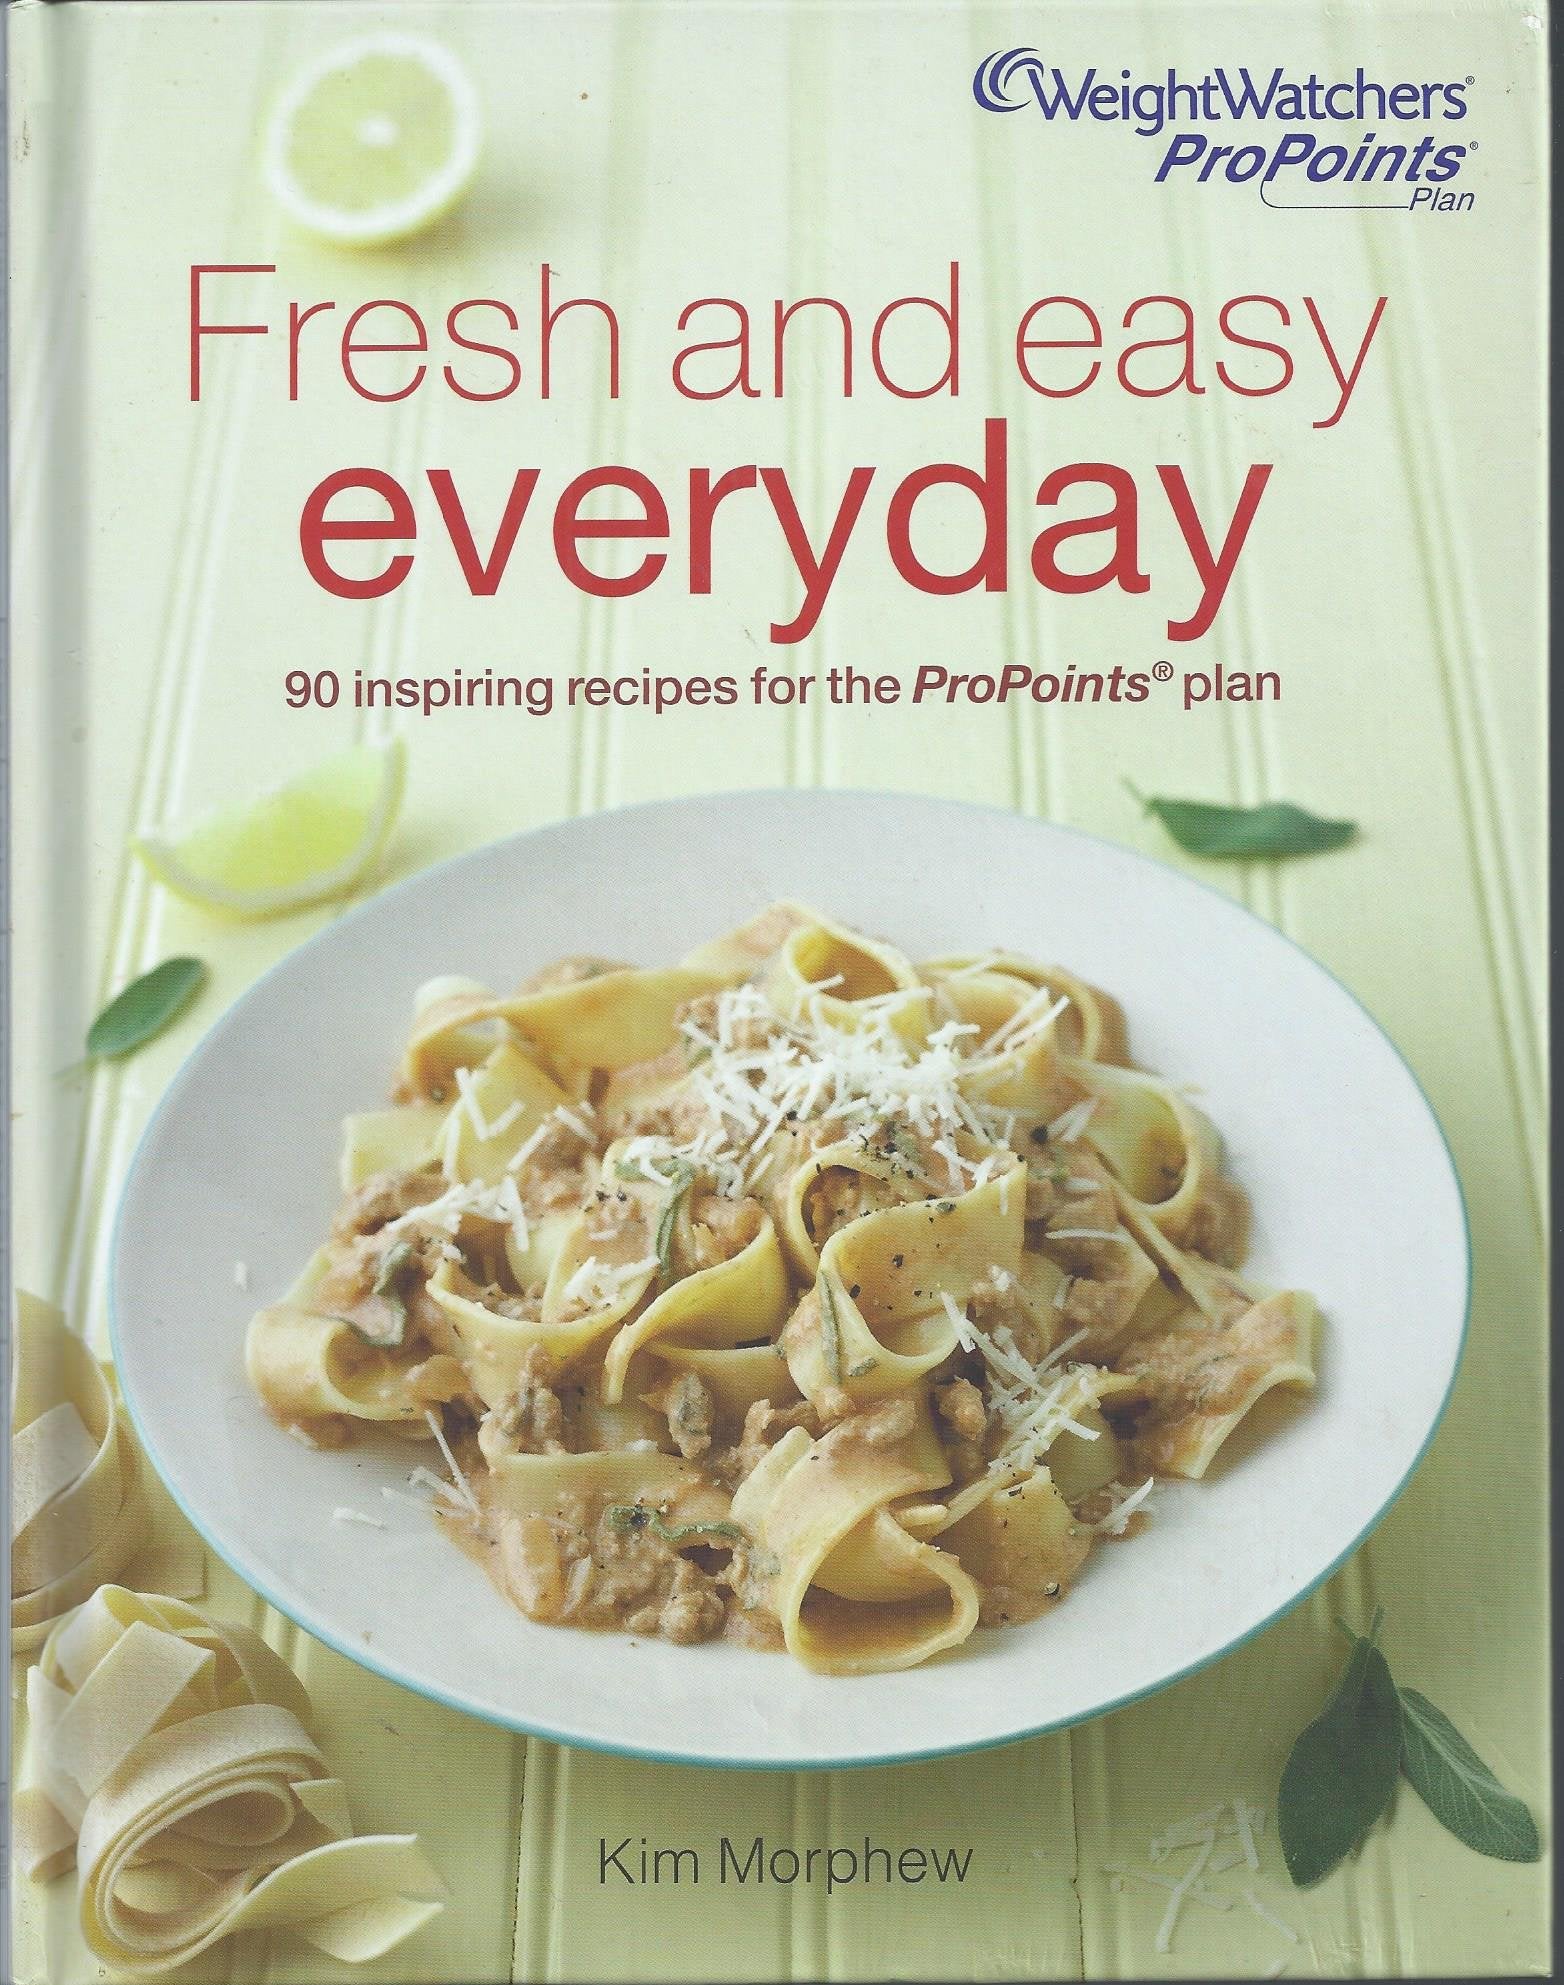 Weight Watchers Fresh and Easy Everyday Cookbook